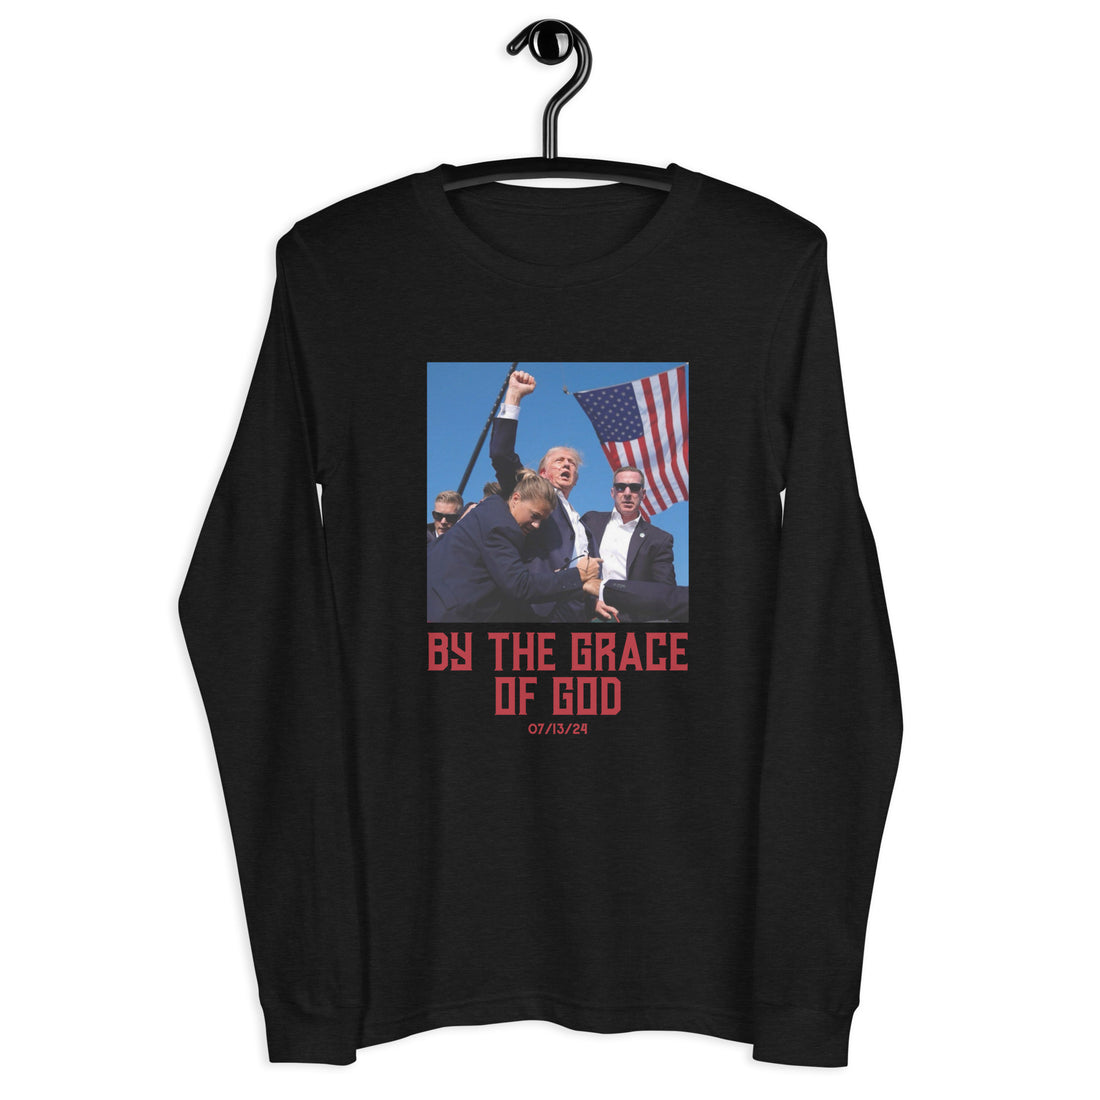 🙏 By the Grace of God - Long Sleeves